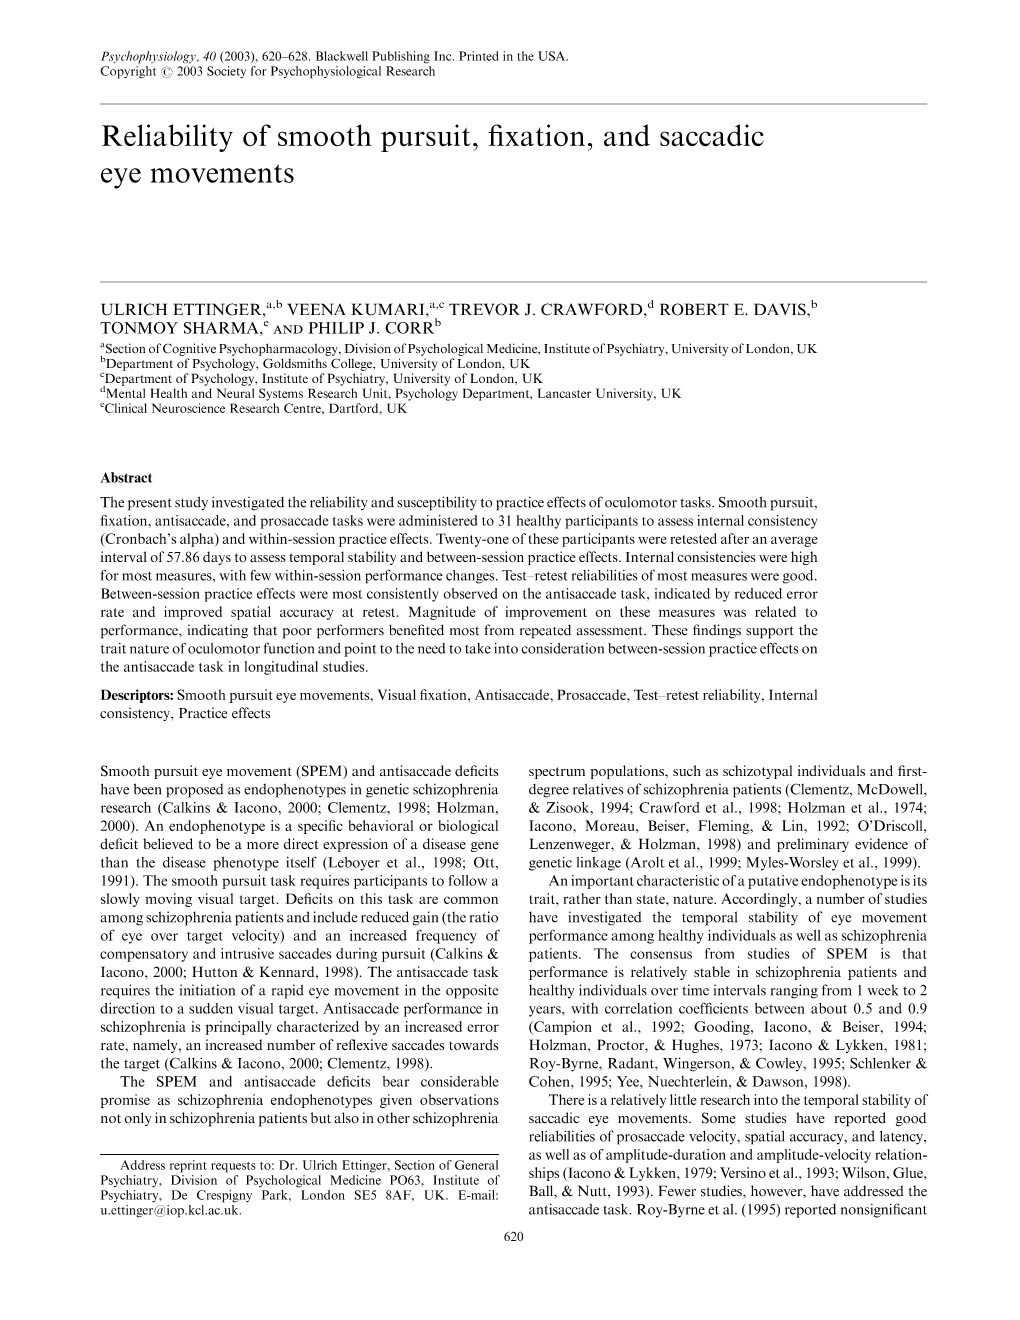 Reliability of Smooth Pursuit, Fixation, and Saccadic Eye Movements